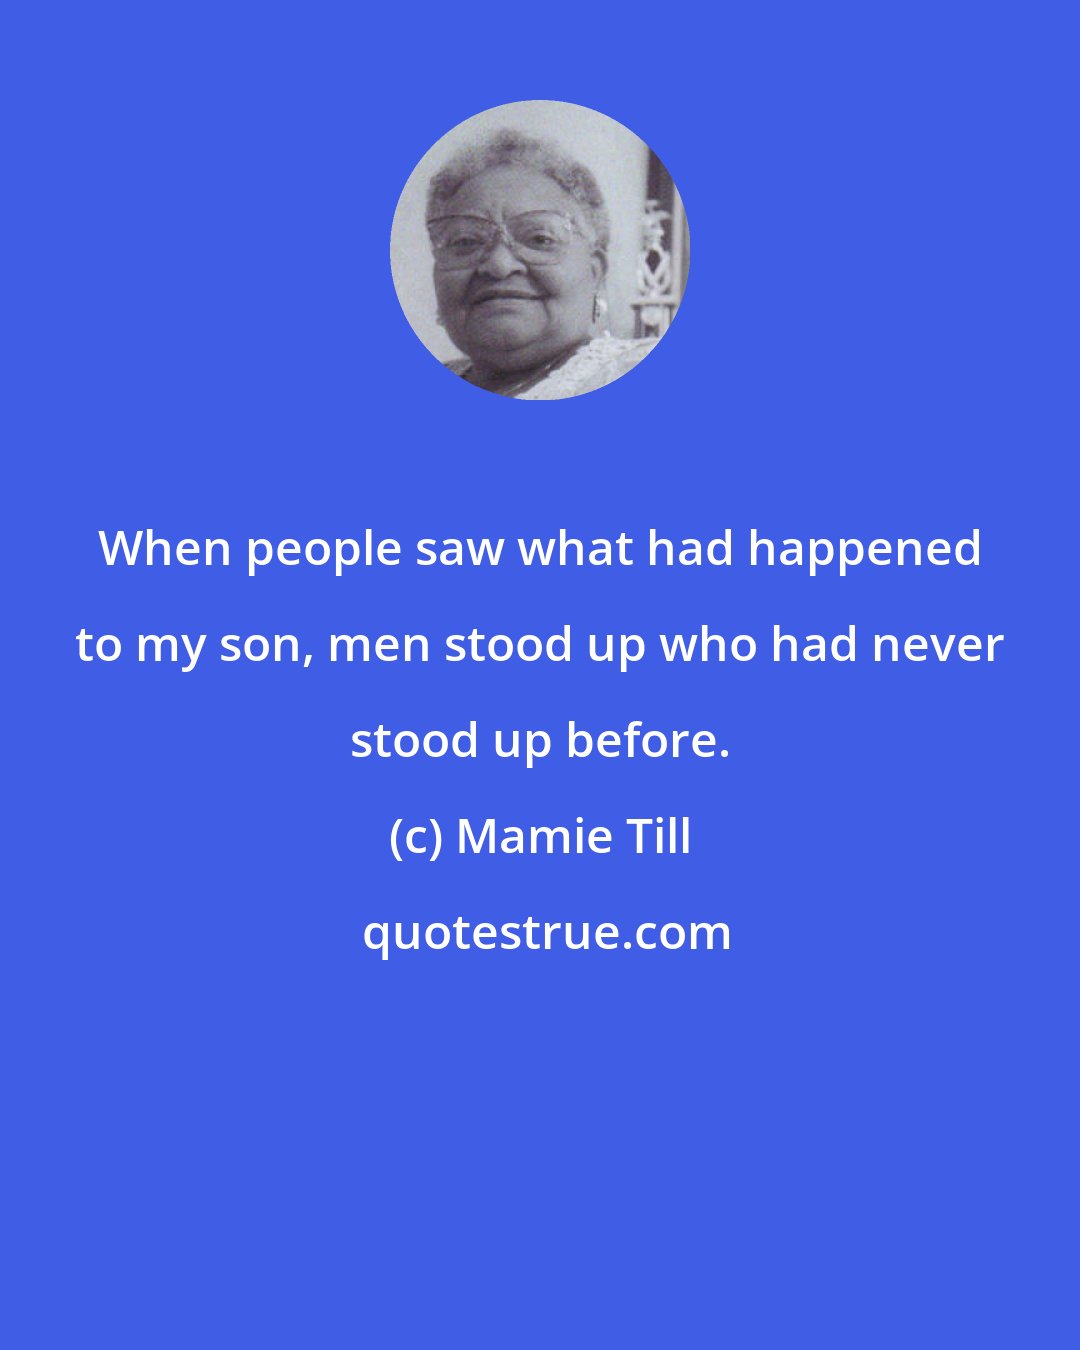 Mamie Till: When people saw what had happened to my son, men stood up who had never stood up before.